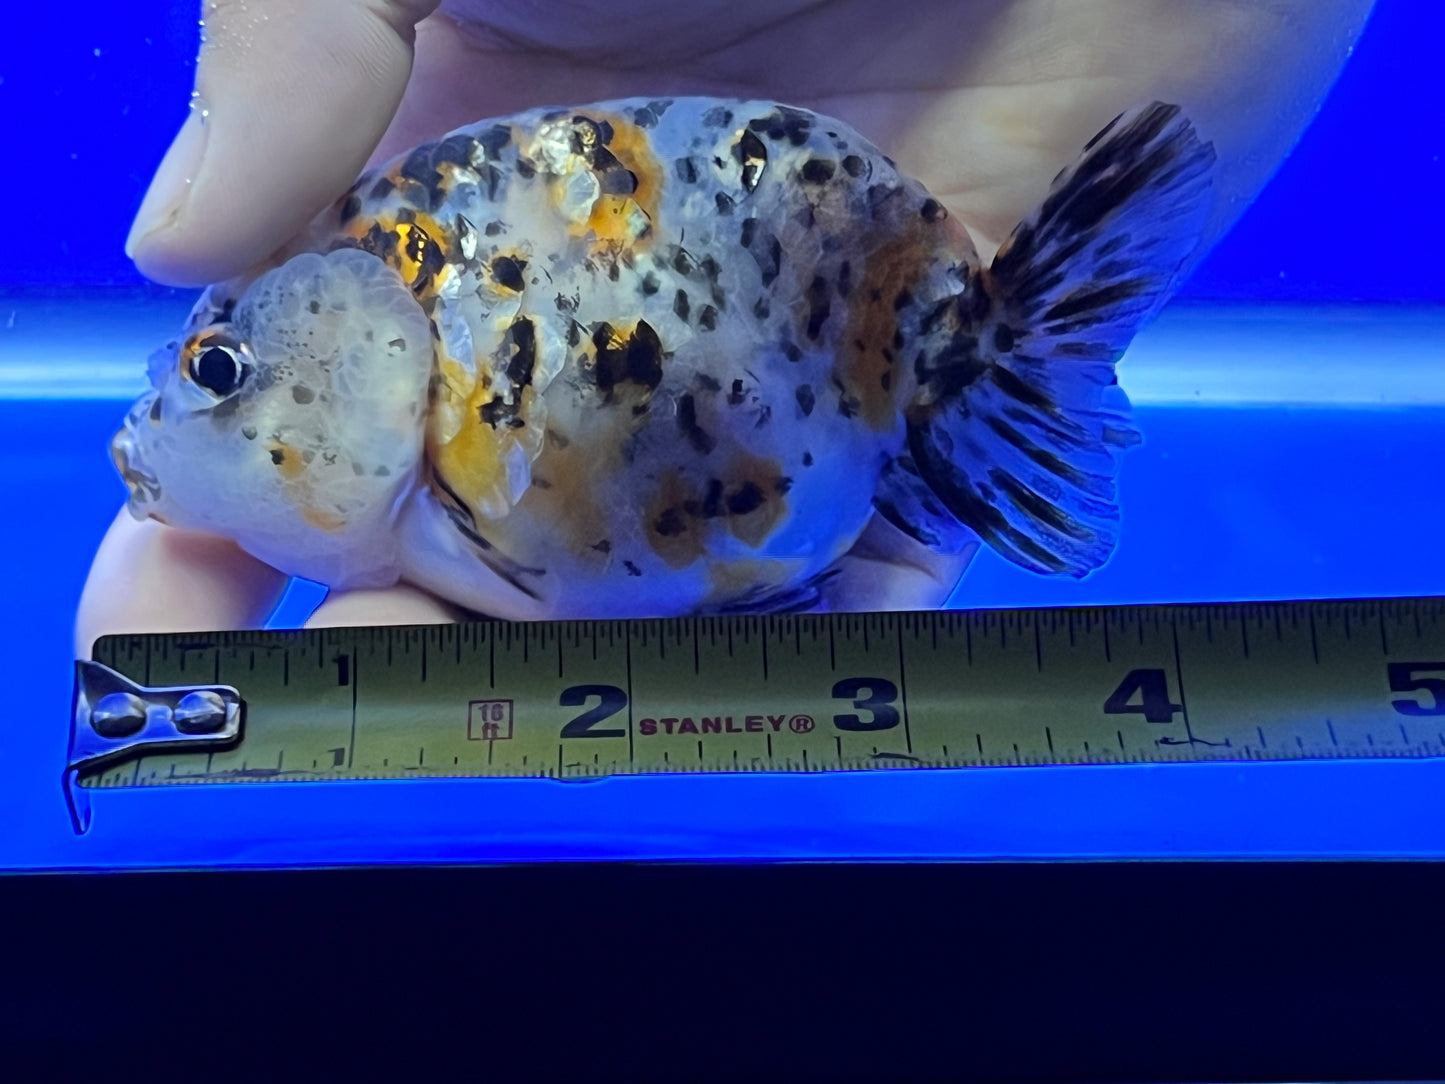 Calico Ranchu for Sale